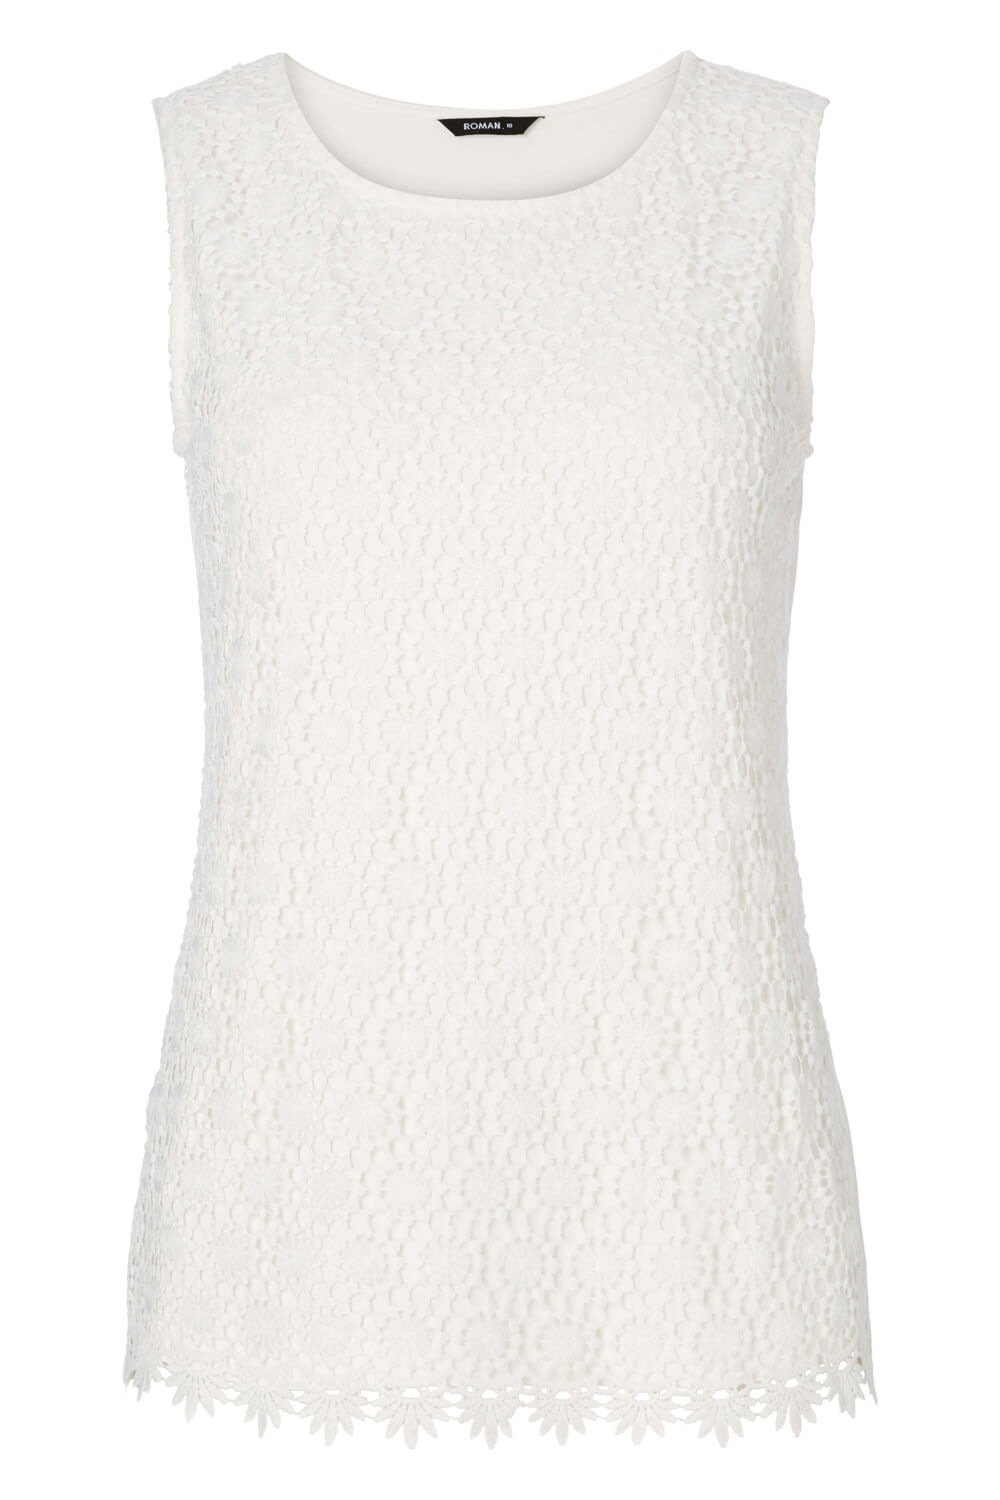 Ivory  Lace Front Jersey Top, Image 4 of 4